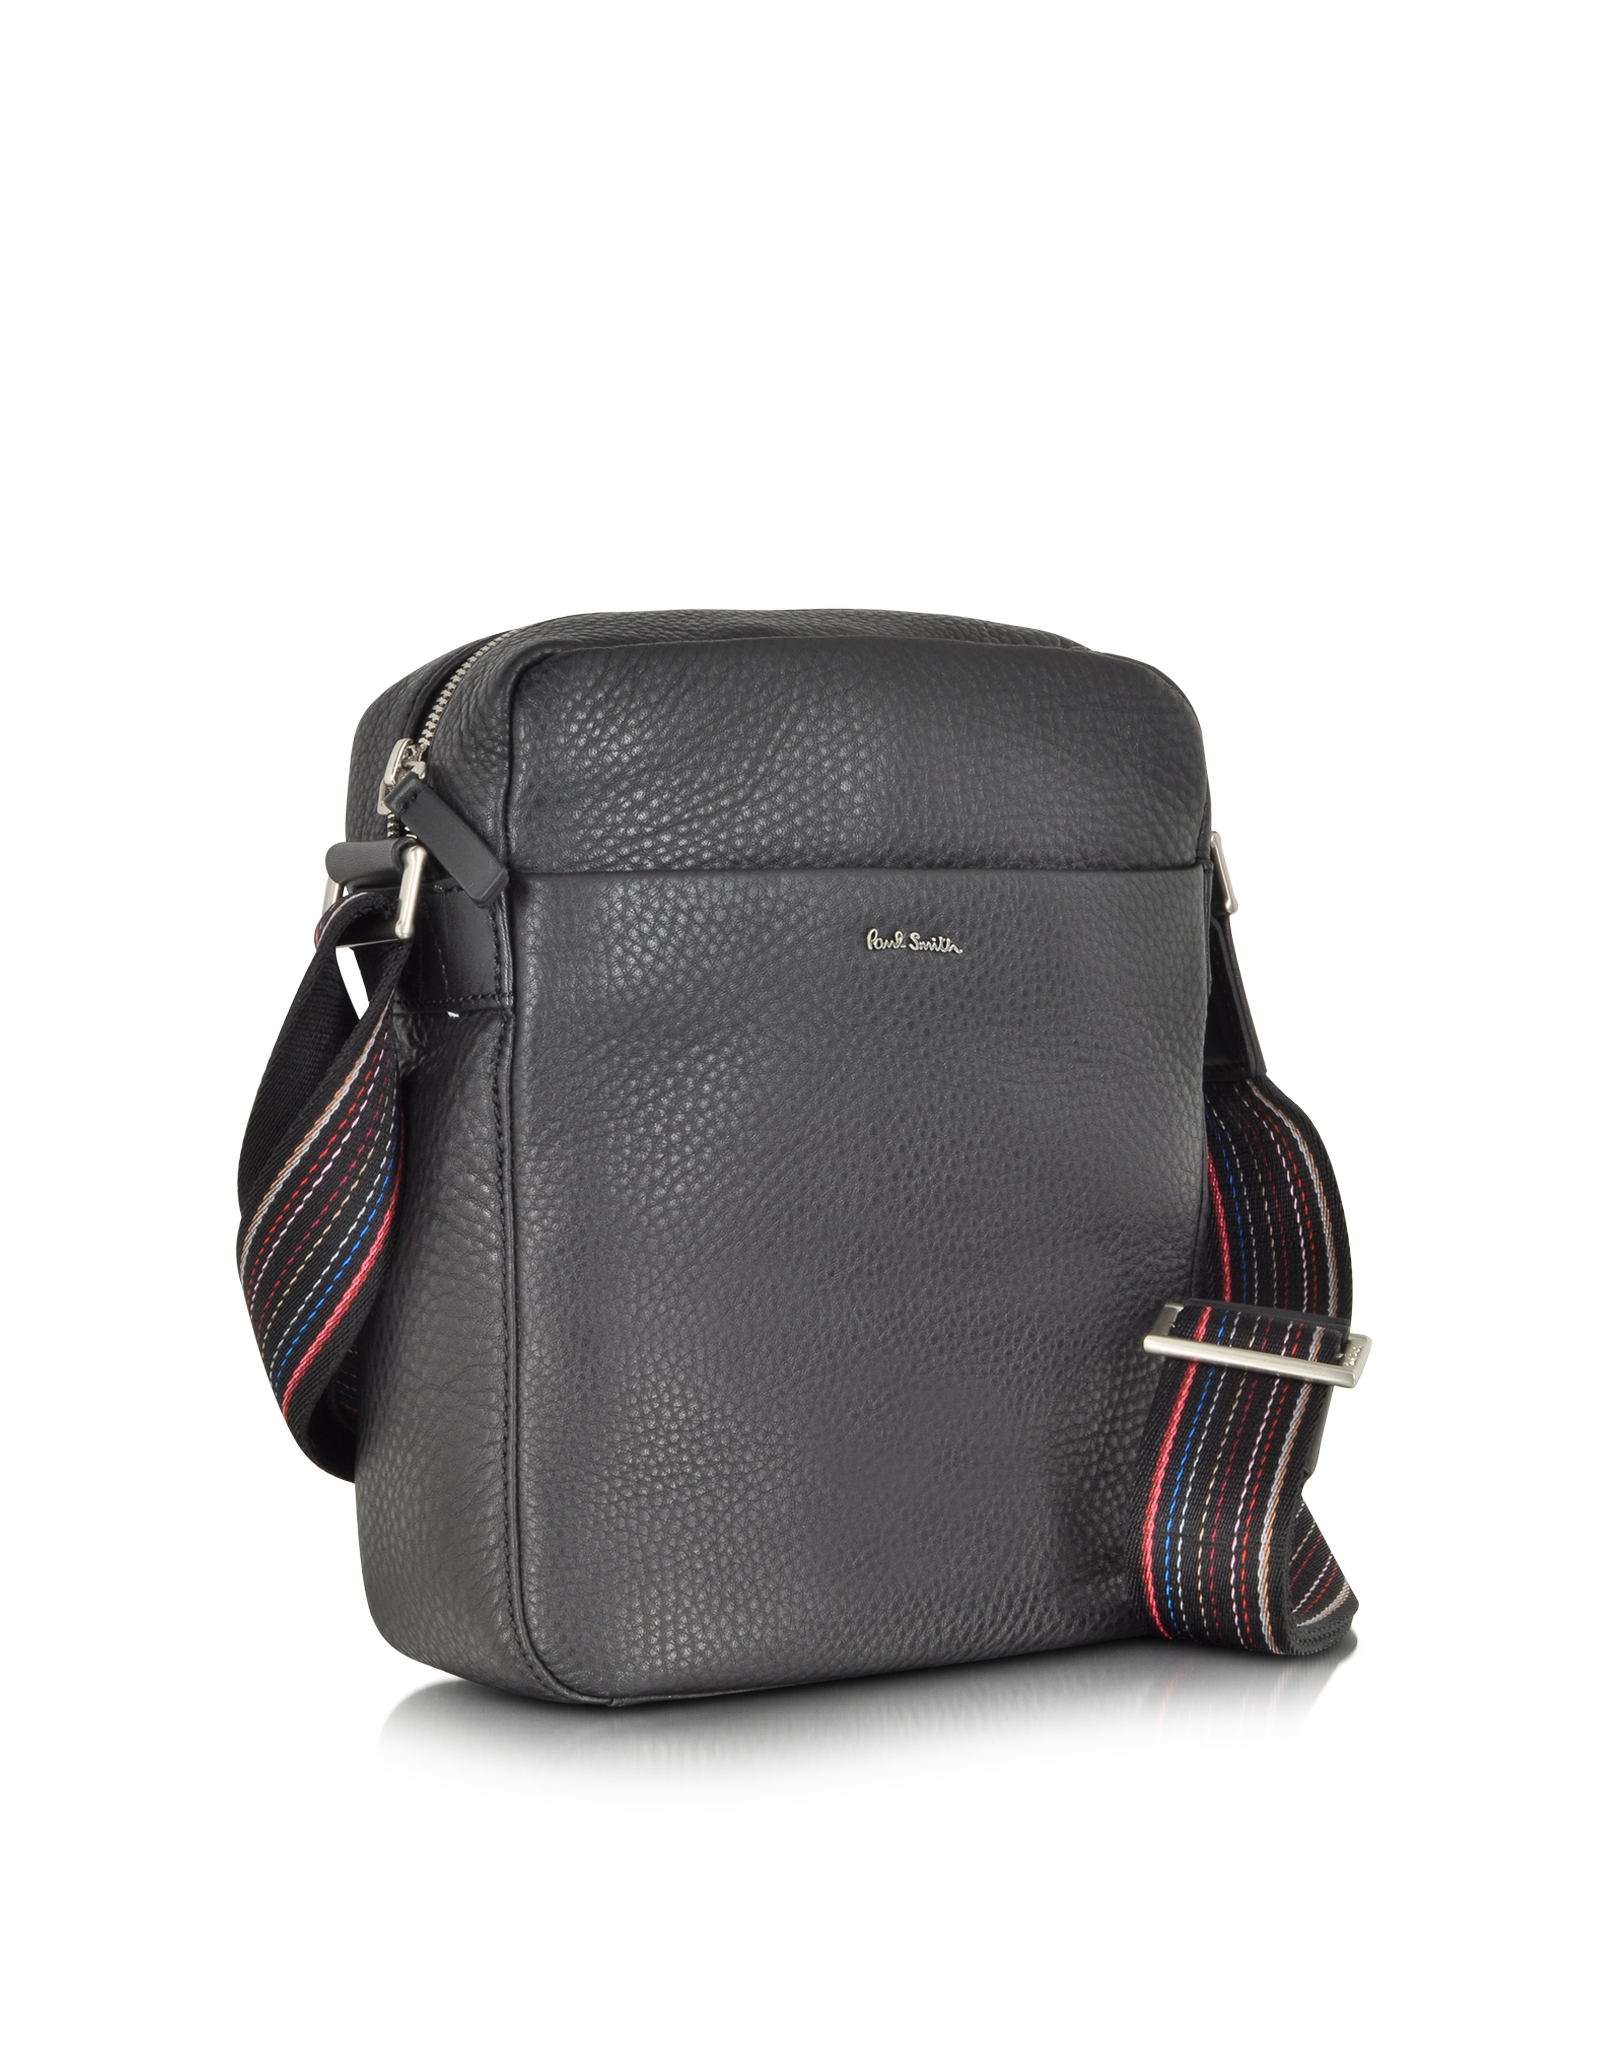 Lyst - Paul smith Black Leather Small Crossbody Bag in Gray